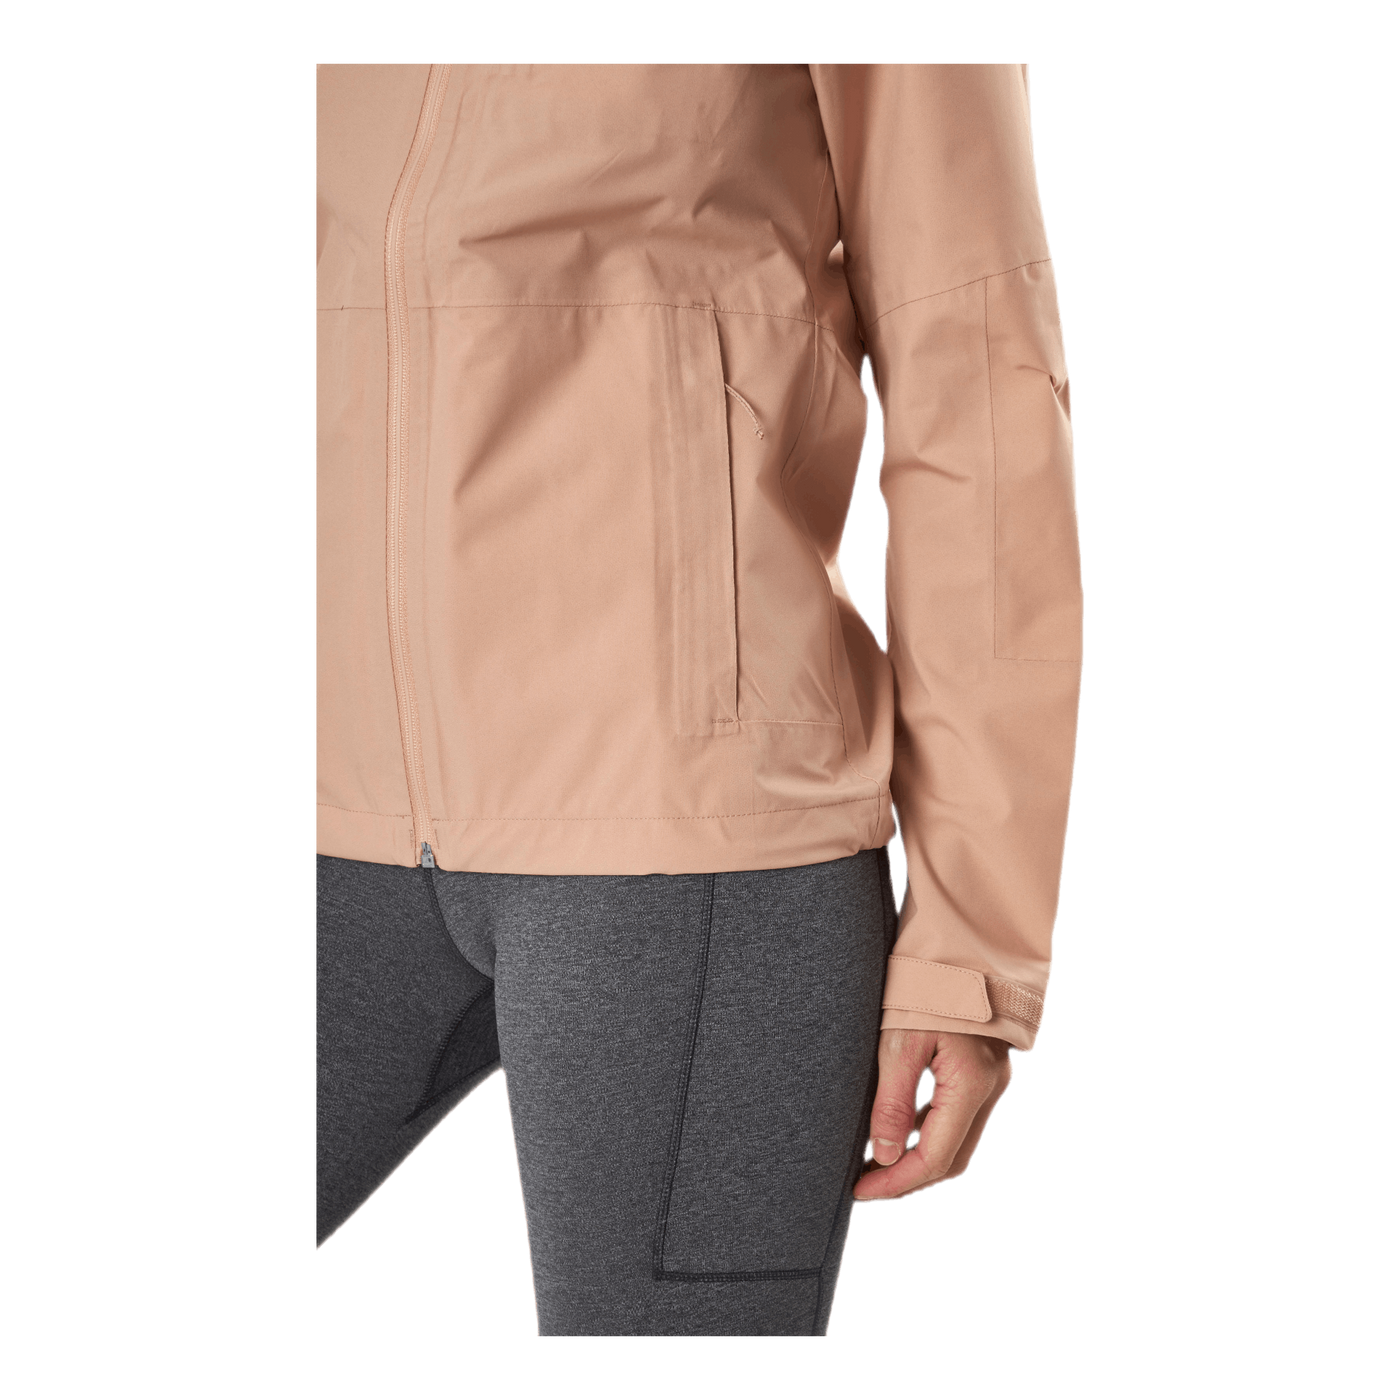 Outrack 2.5L Waterproof Jacket Pink